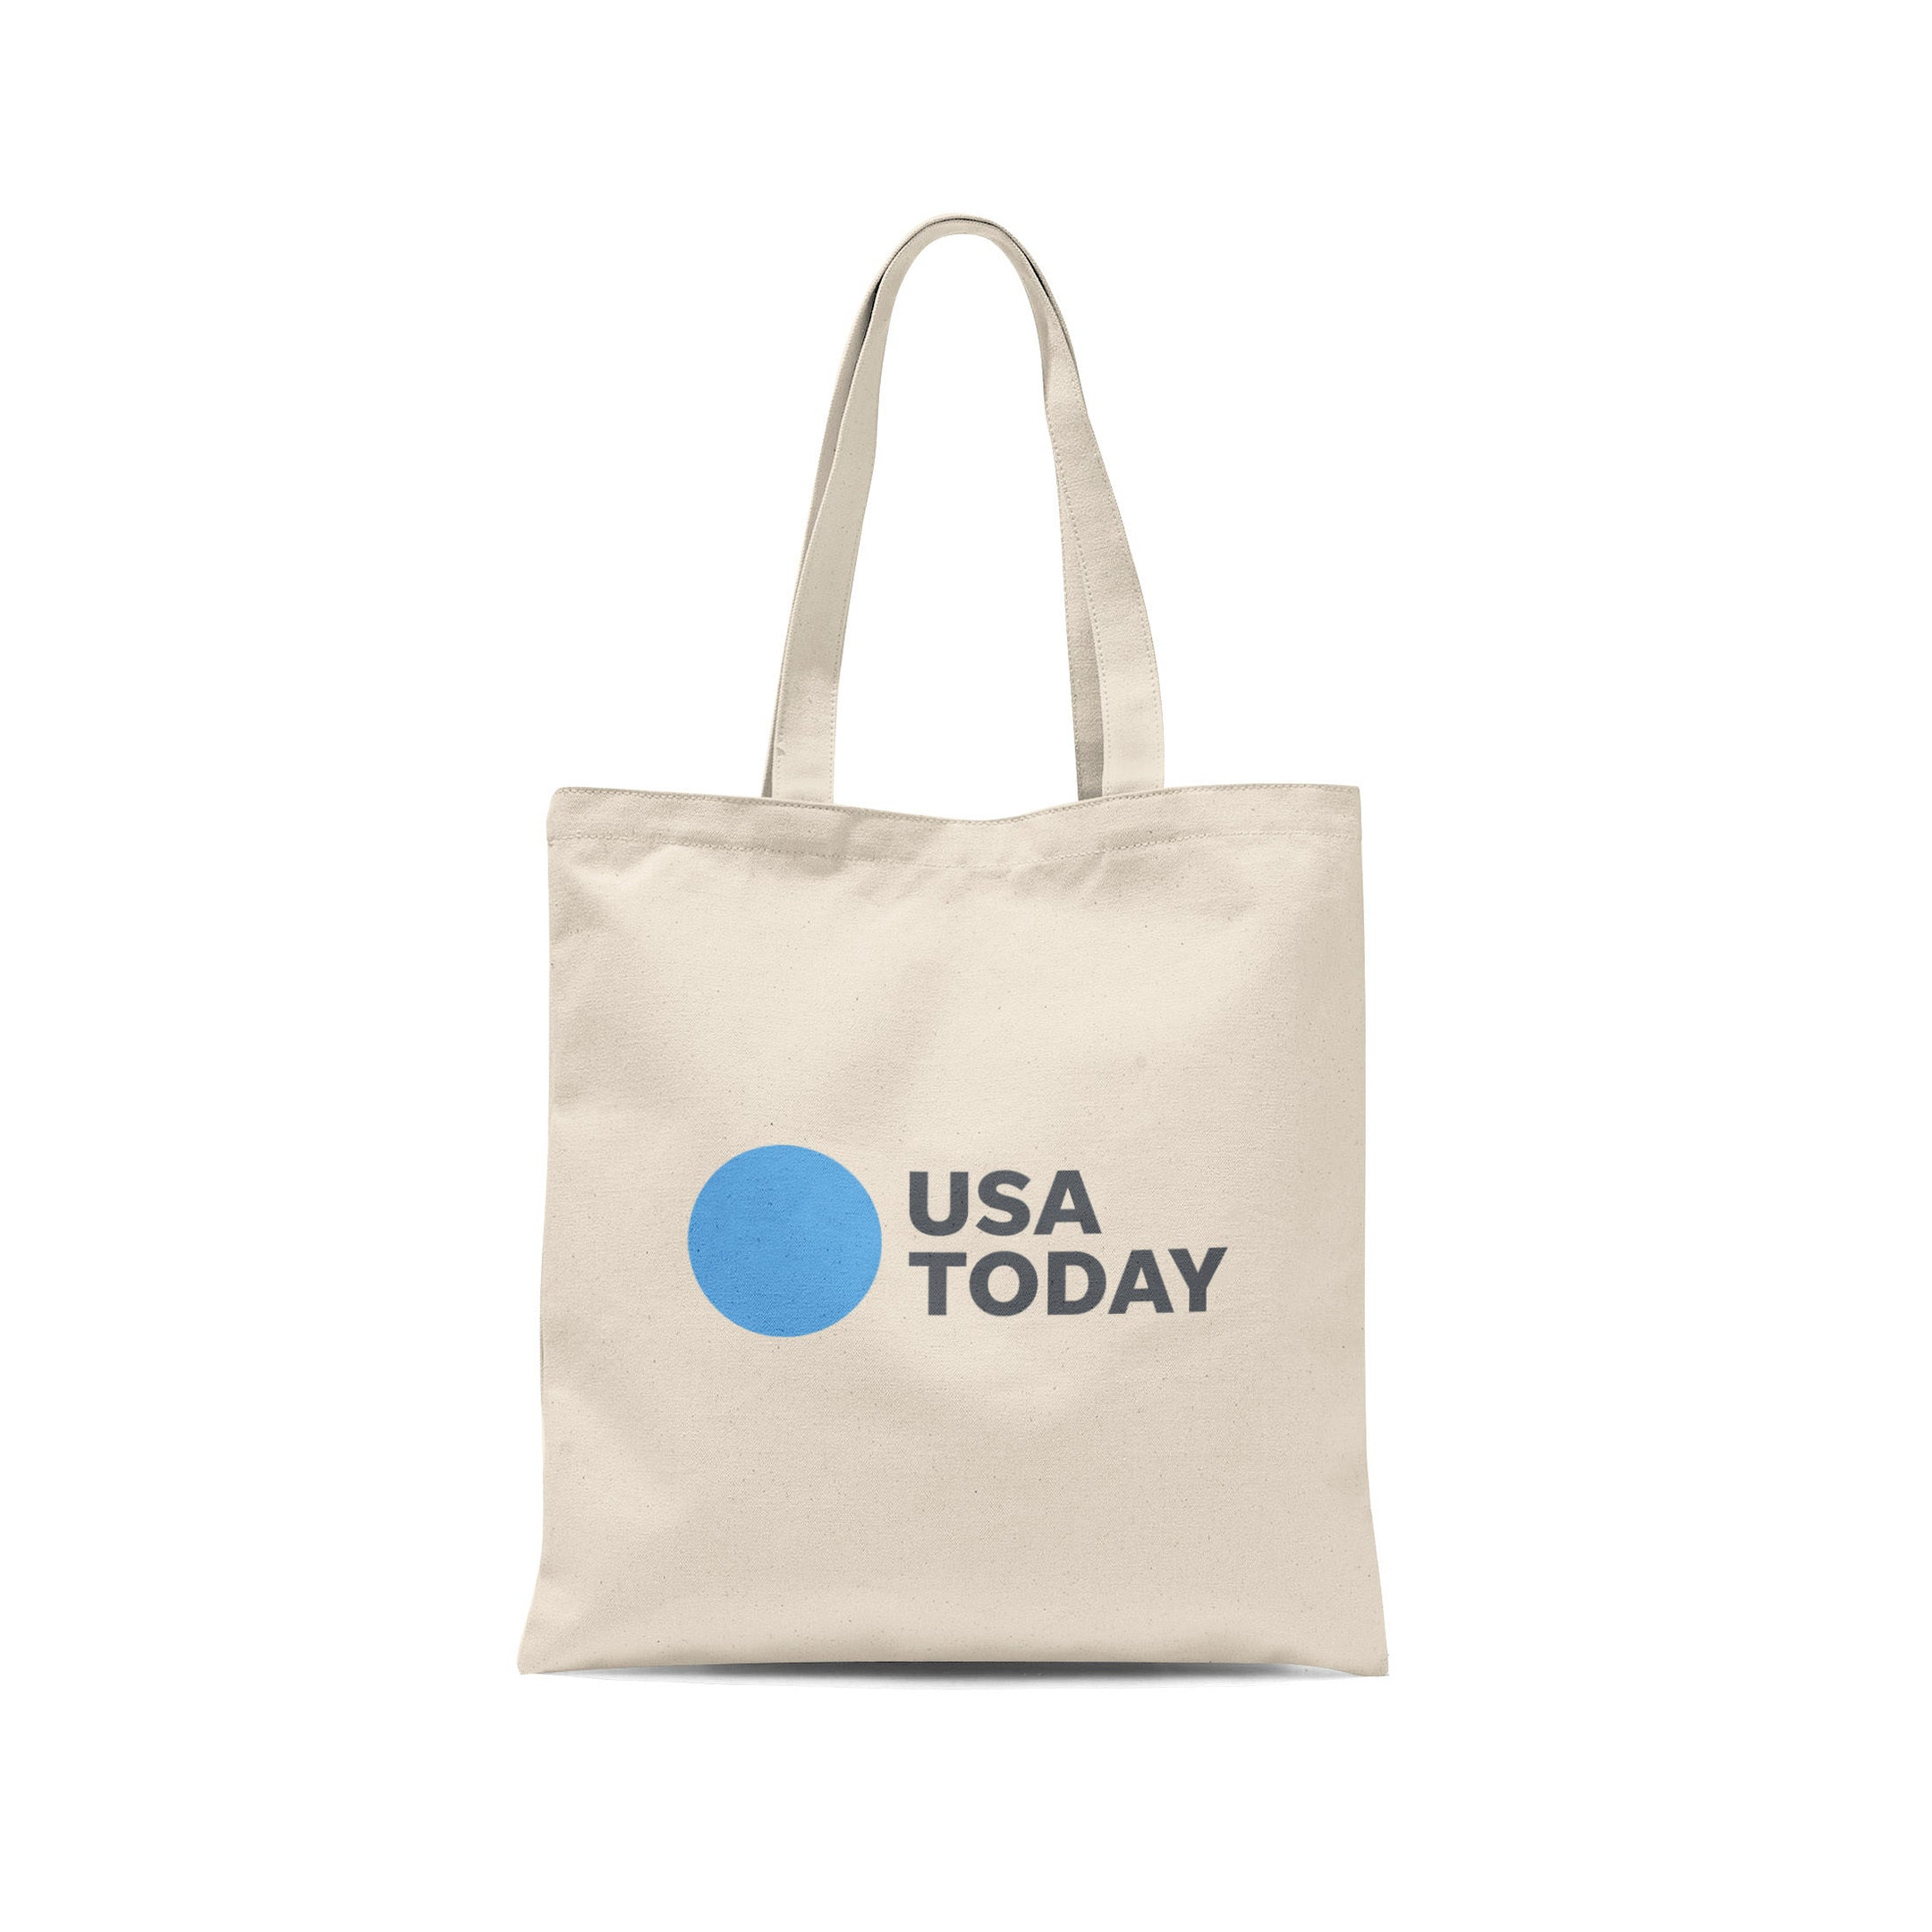 USA TODAY Tote